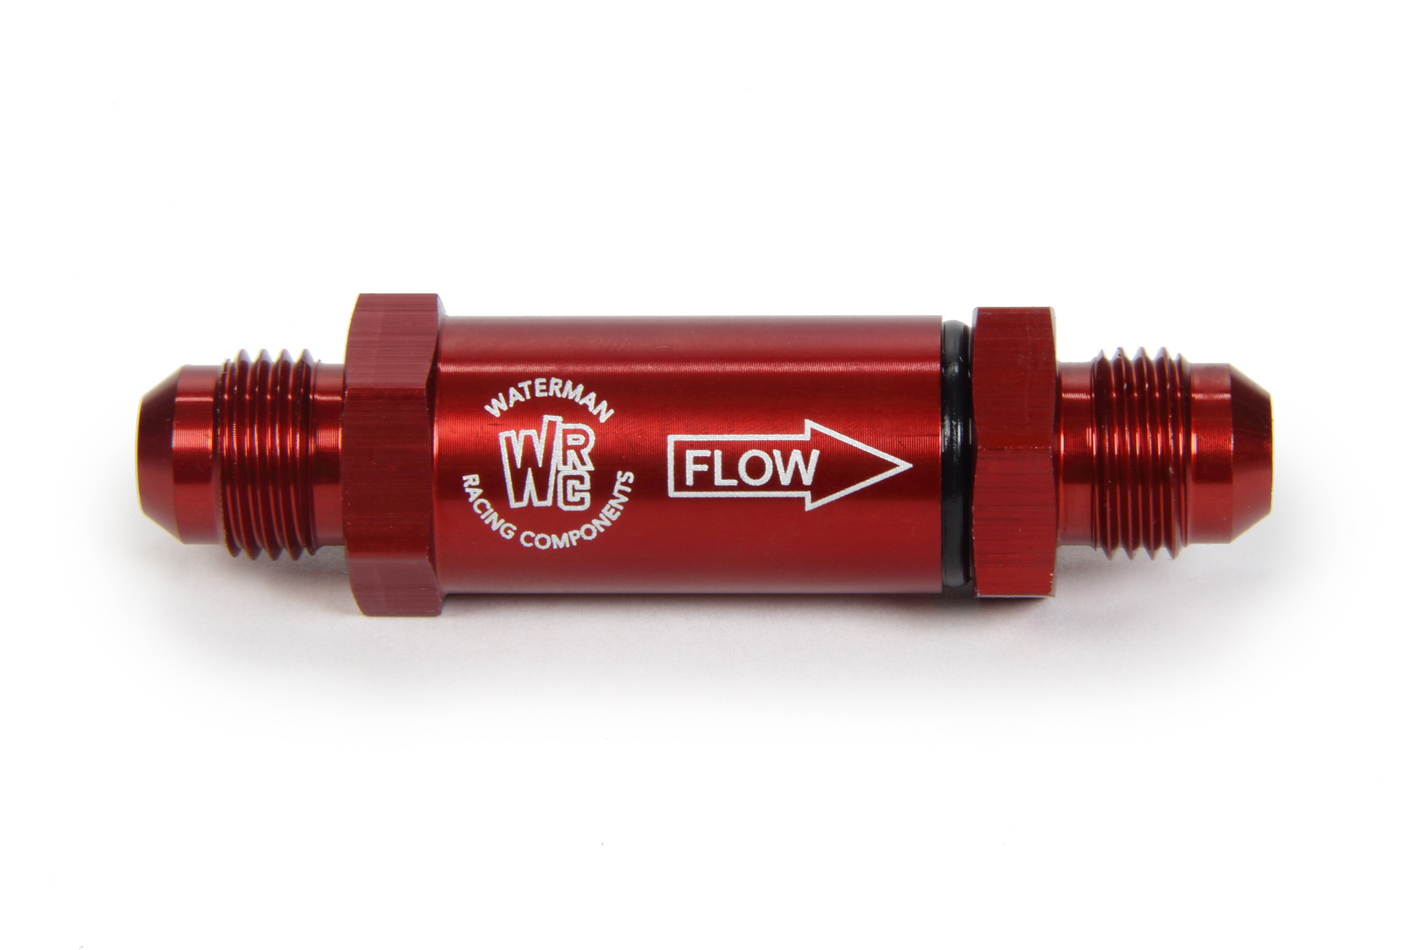 Waterman 766010-A - Check Valve, 6 AN Male Inlet, 6 AN Male Outlet, Low Pressure, Aluminum, Red Anodized, Each